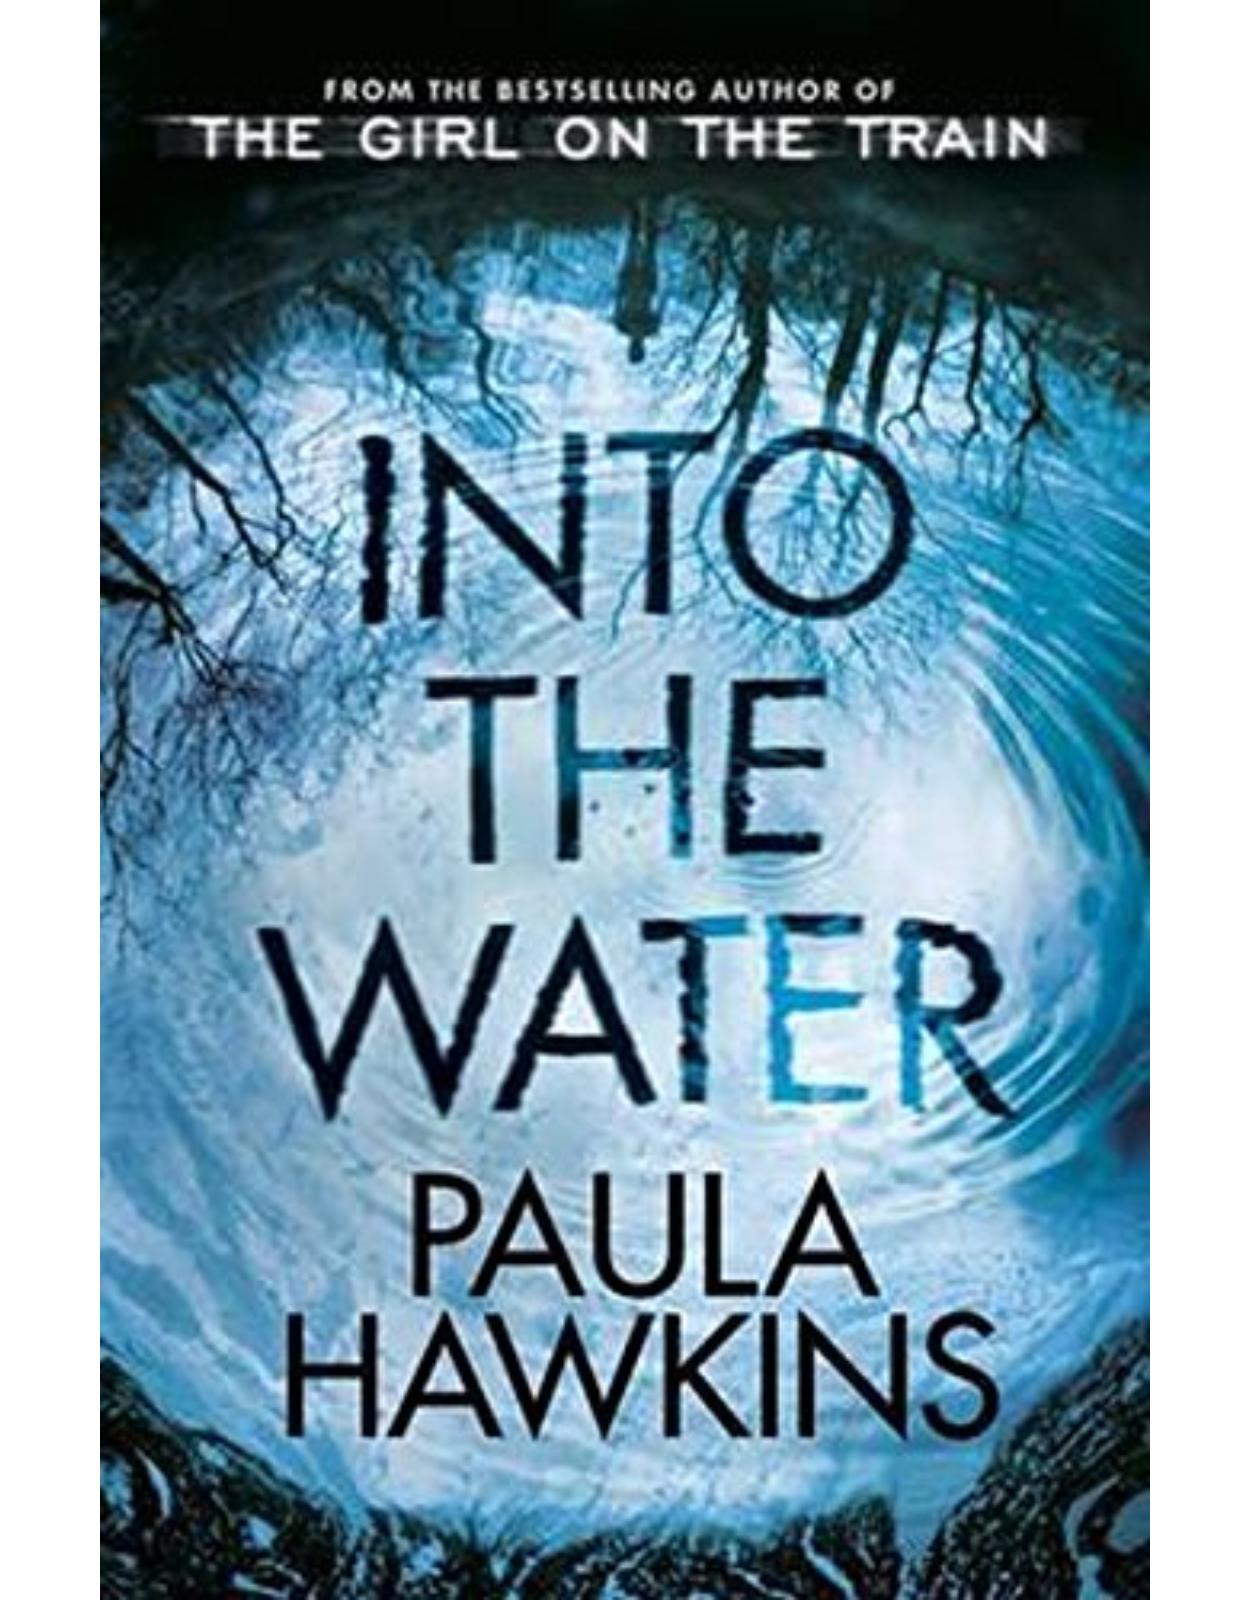 Into the Water: From the bestselling author of The Girl on the Train